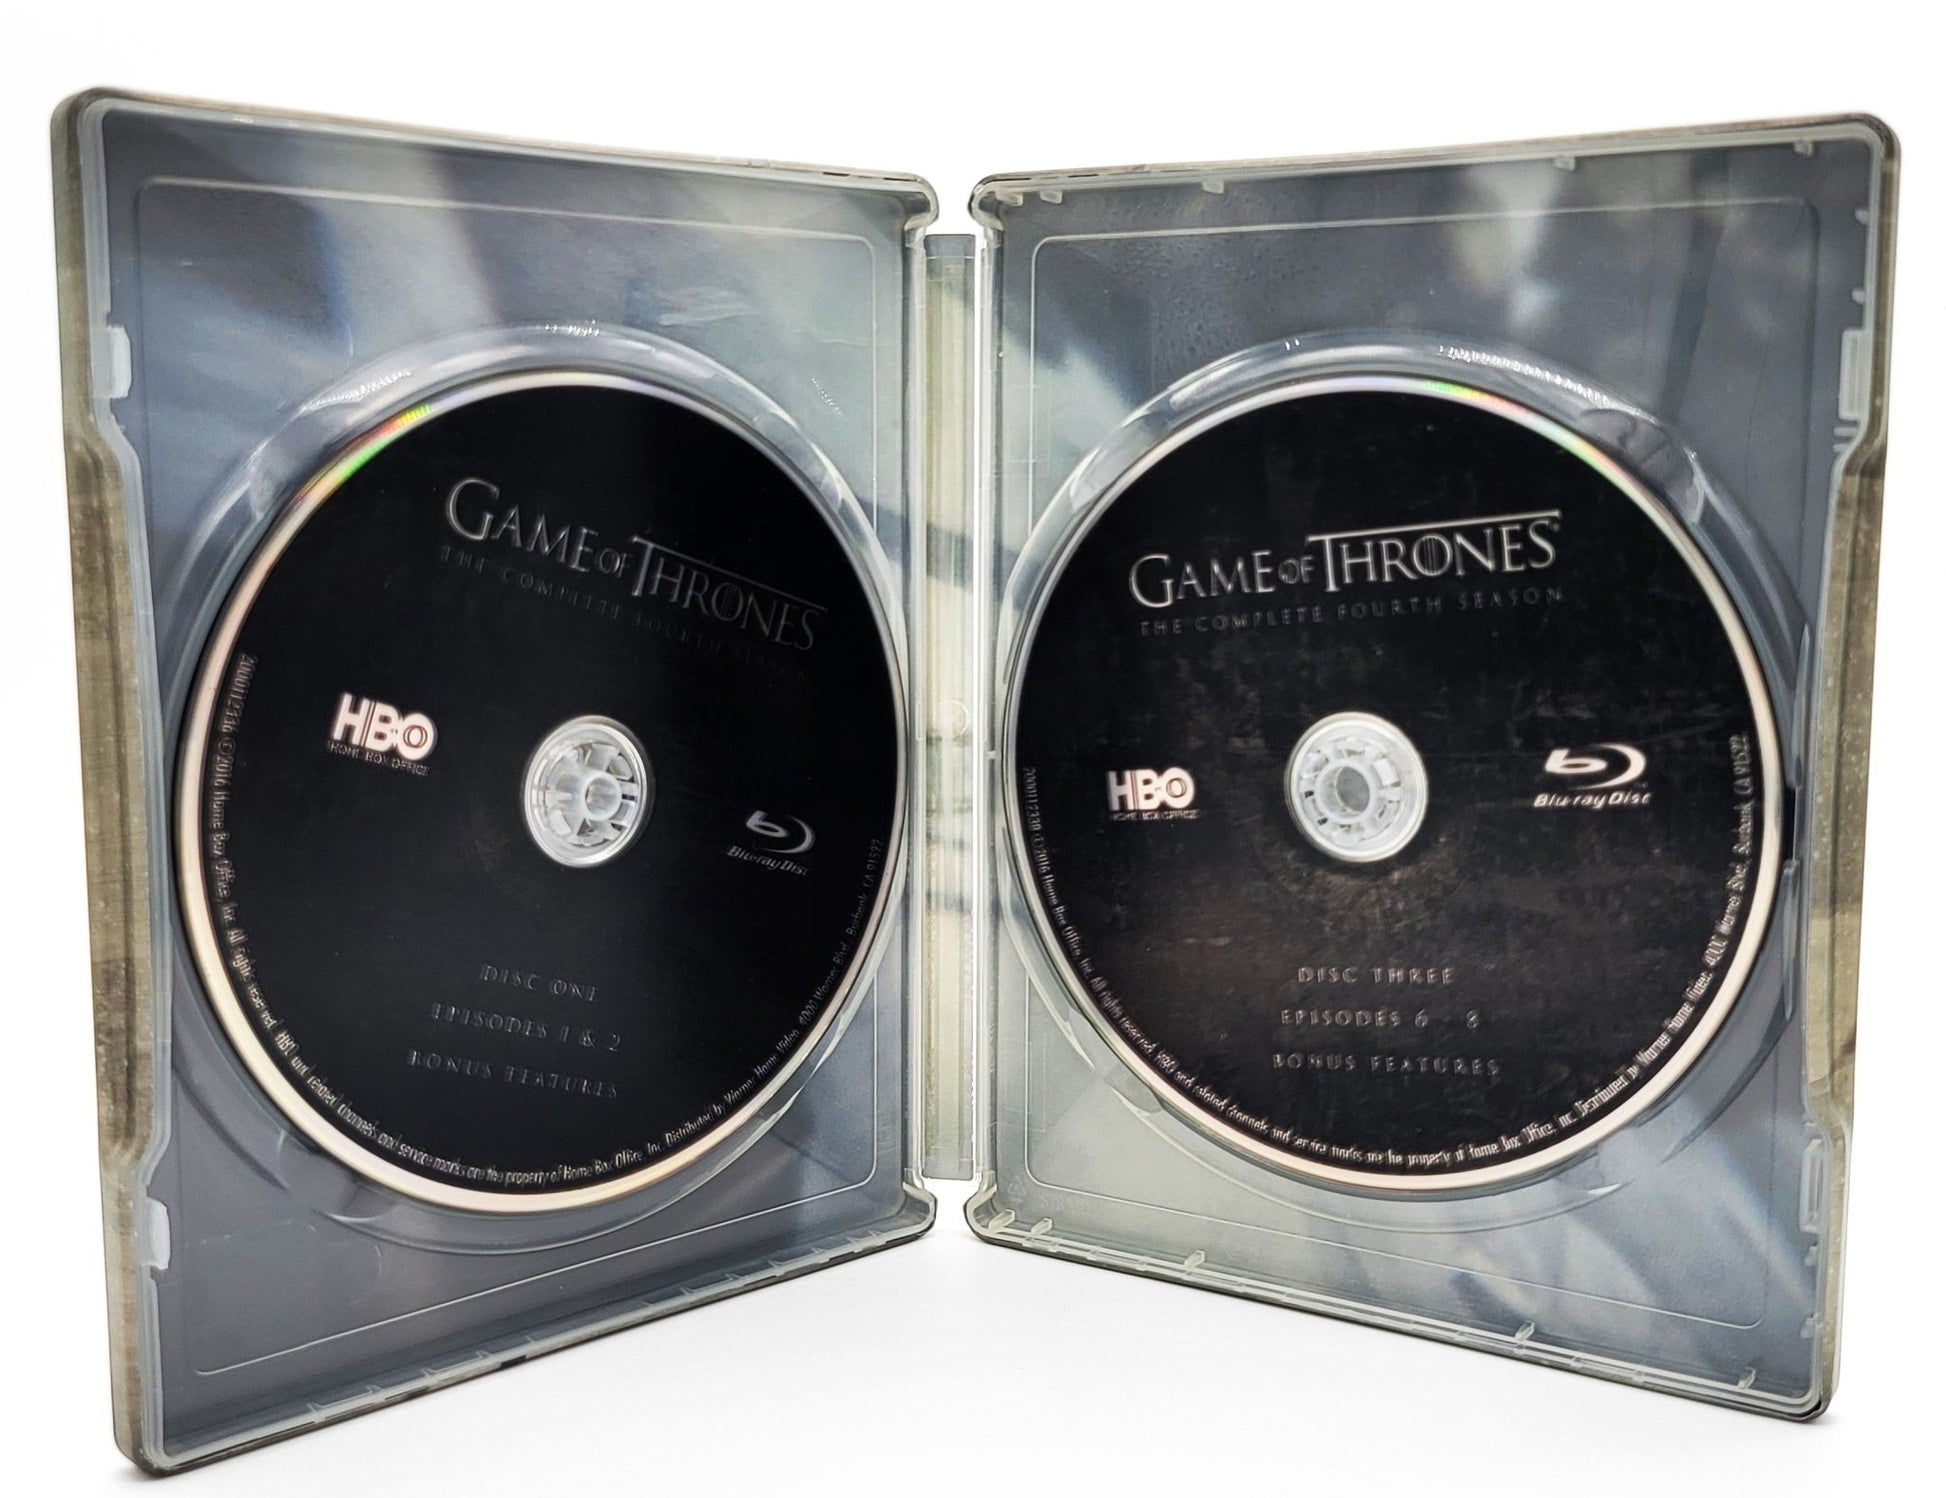 HBO Home Entertainment - Steel Book Game of Thrones - The Wall - The Complete Fourth Season | Blu Ray 4 Disc Set - Limited Edition Collectors Tin - Blu-ray - Steady Bunny Shop